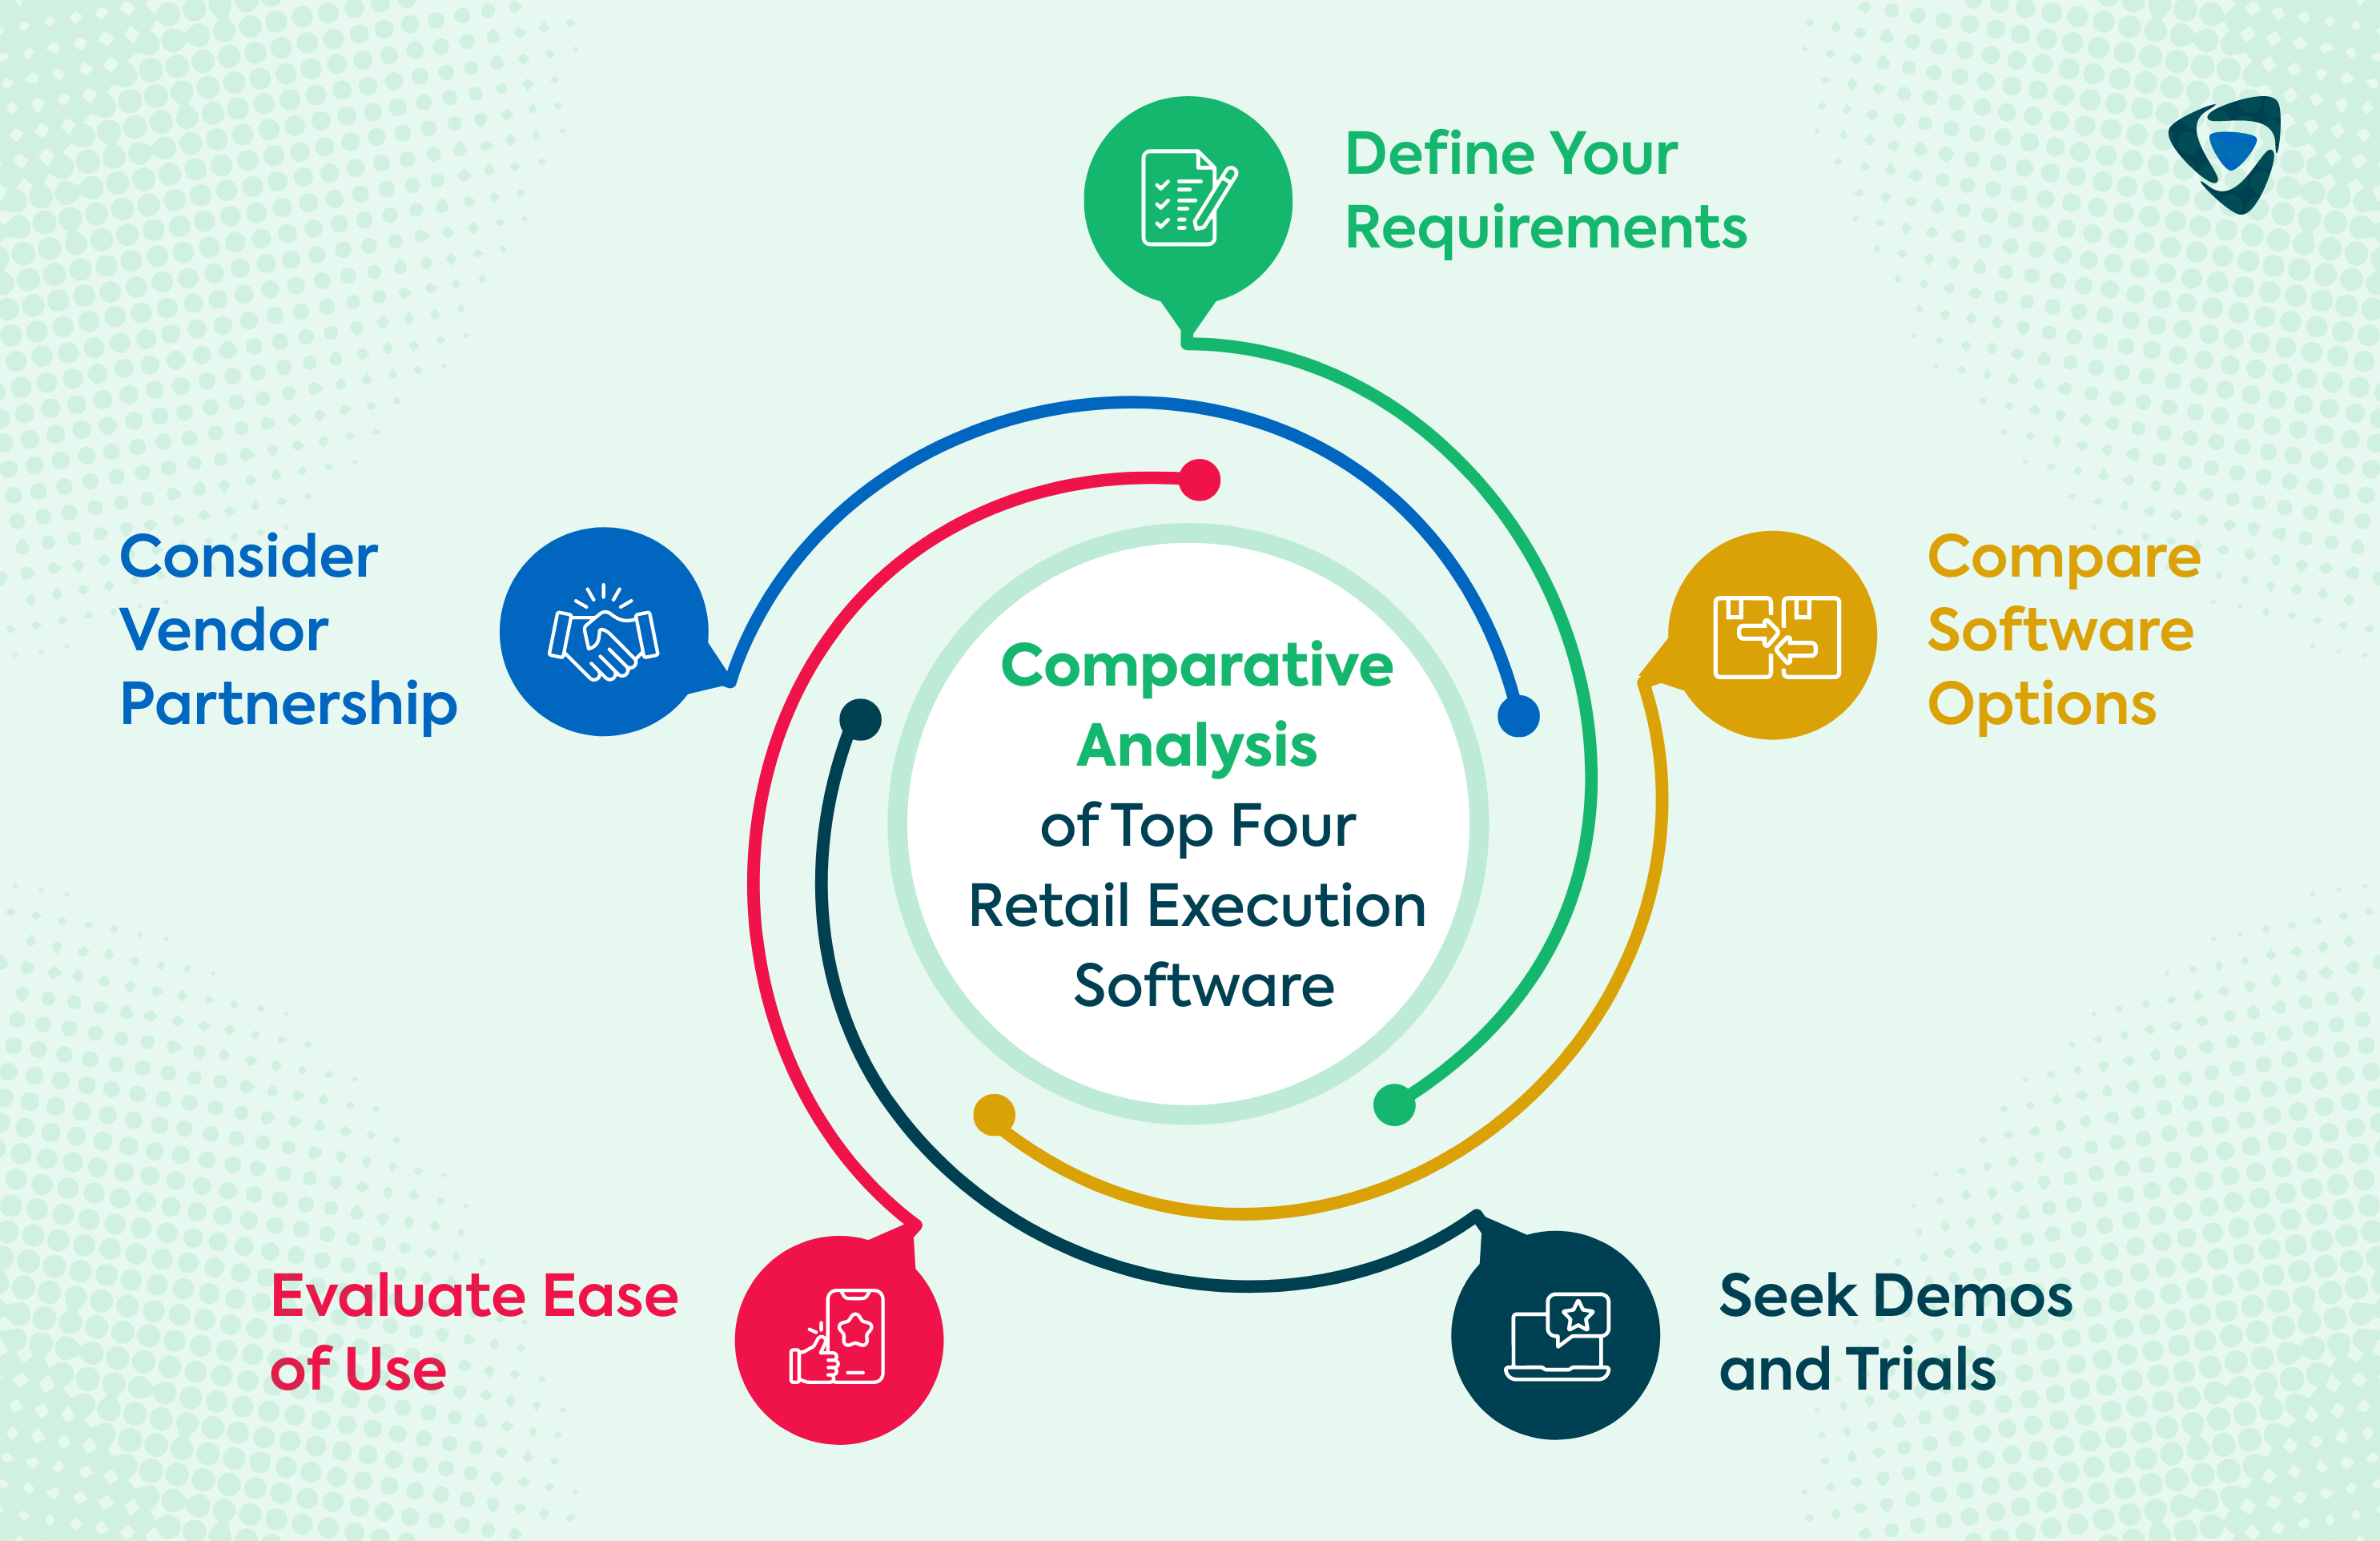 Comparative Analysis of Top Four Retail Execution Software